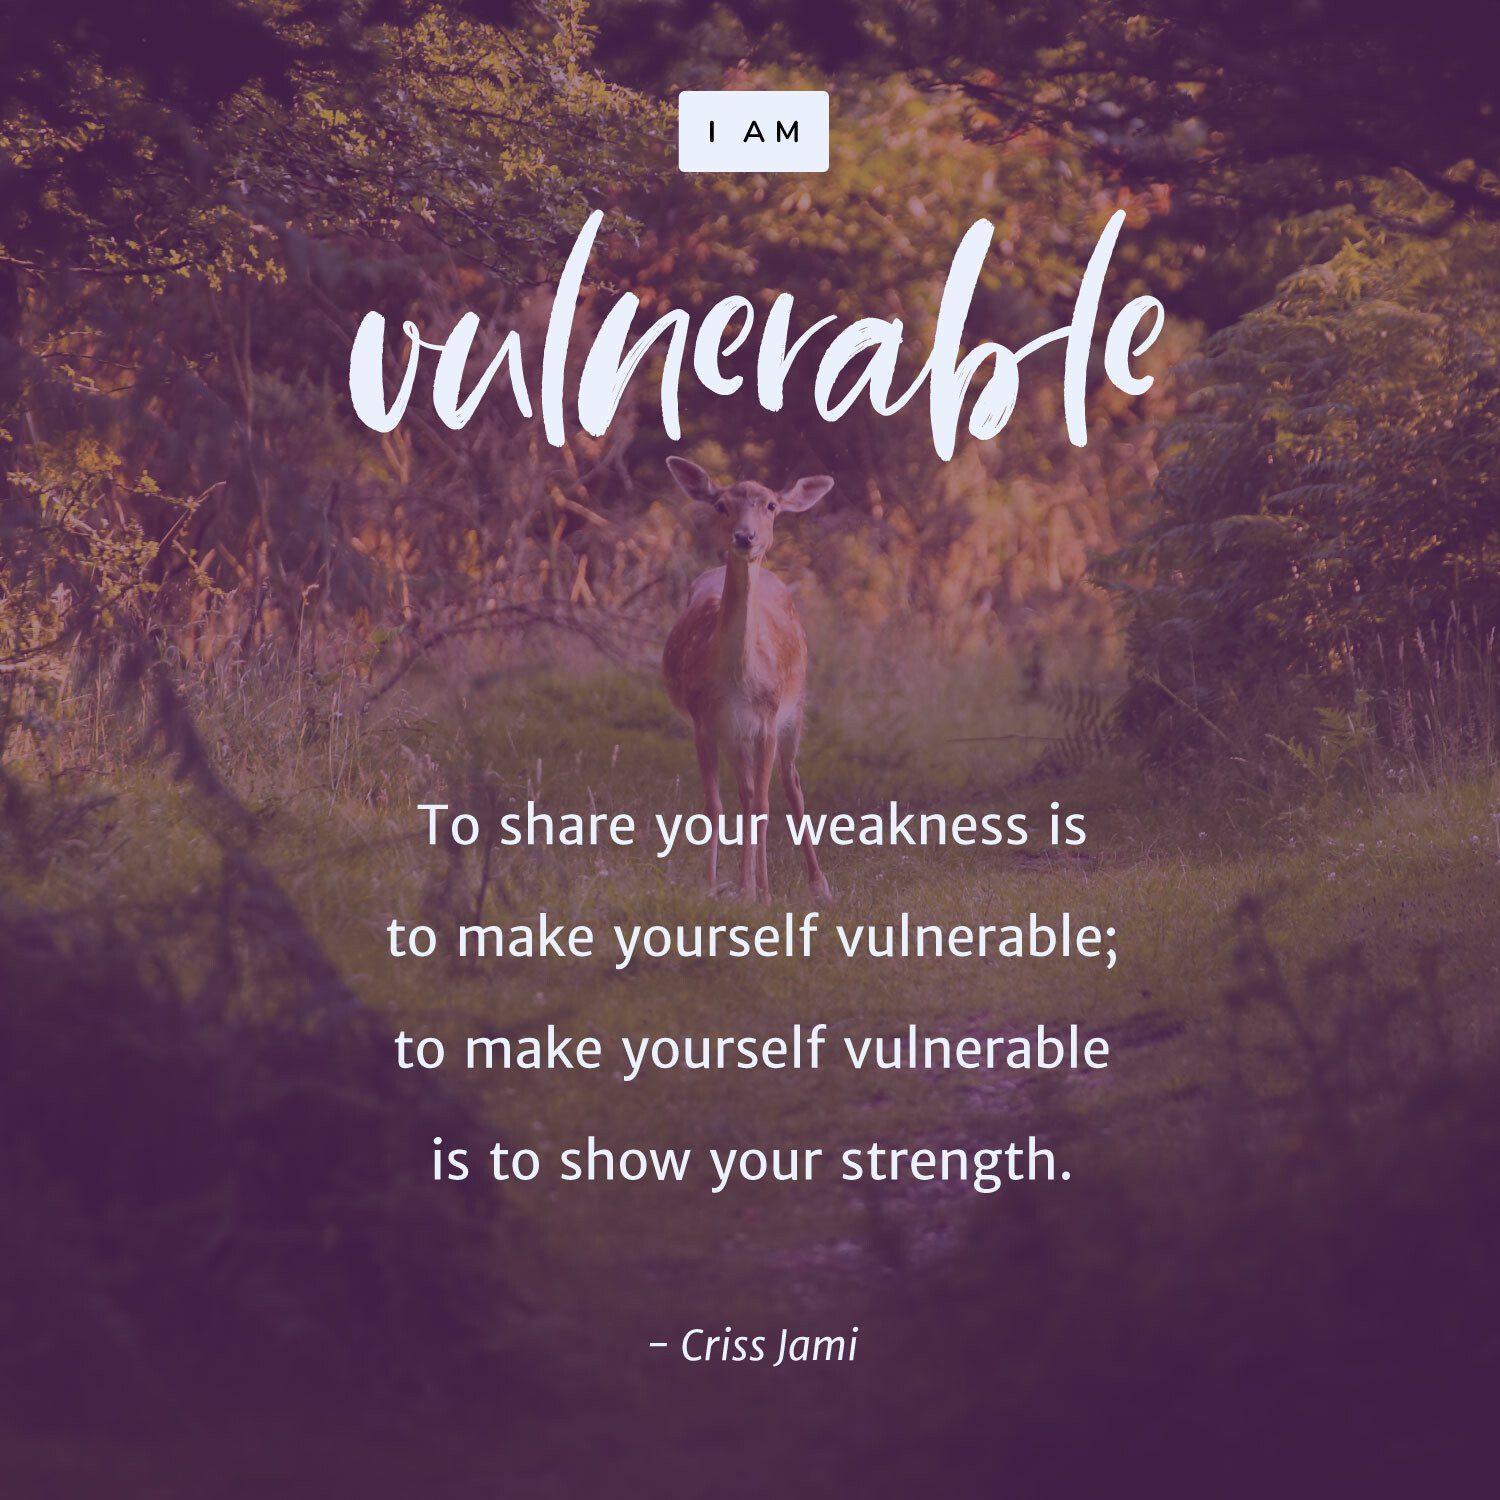 To share your weakness is to make yourself vulnerable; to make yourself vulnerable is to show your strength. – Criss Jami